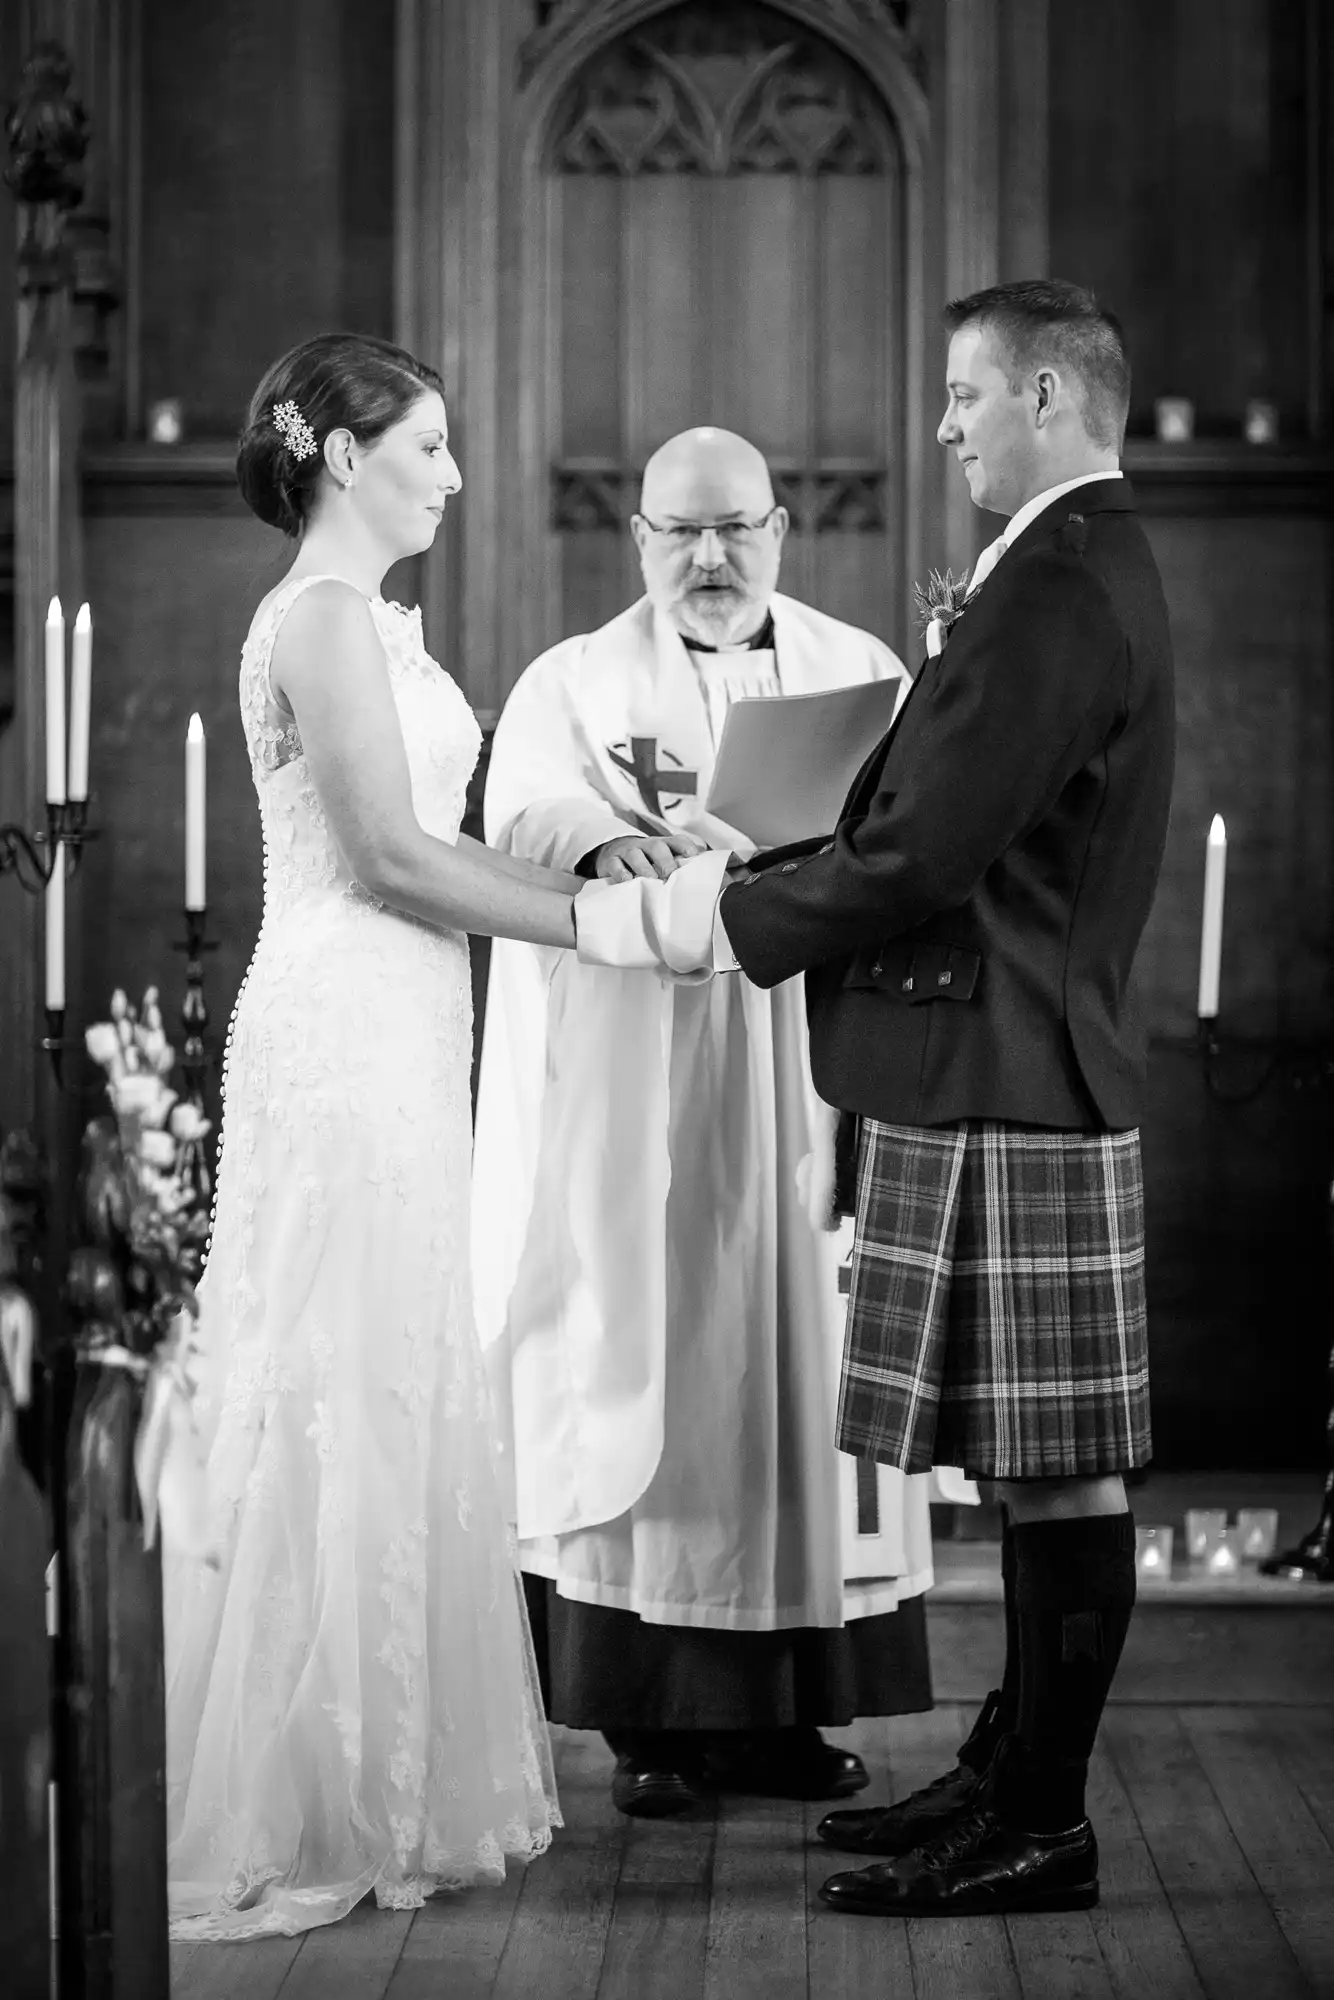 A bride and groom holding hands during a wedding ceremony, officiated by a priest in a church, captured in black and white.